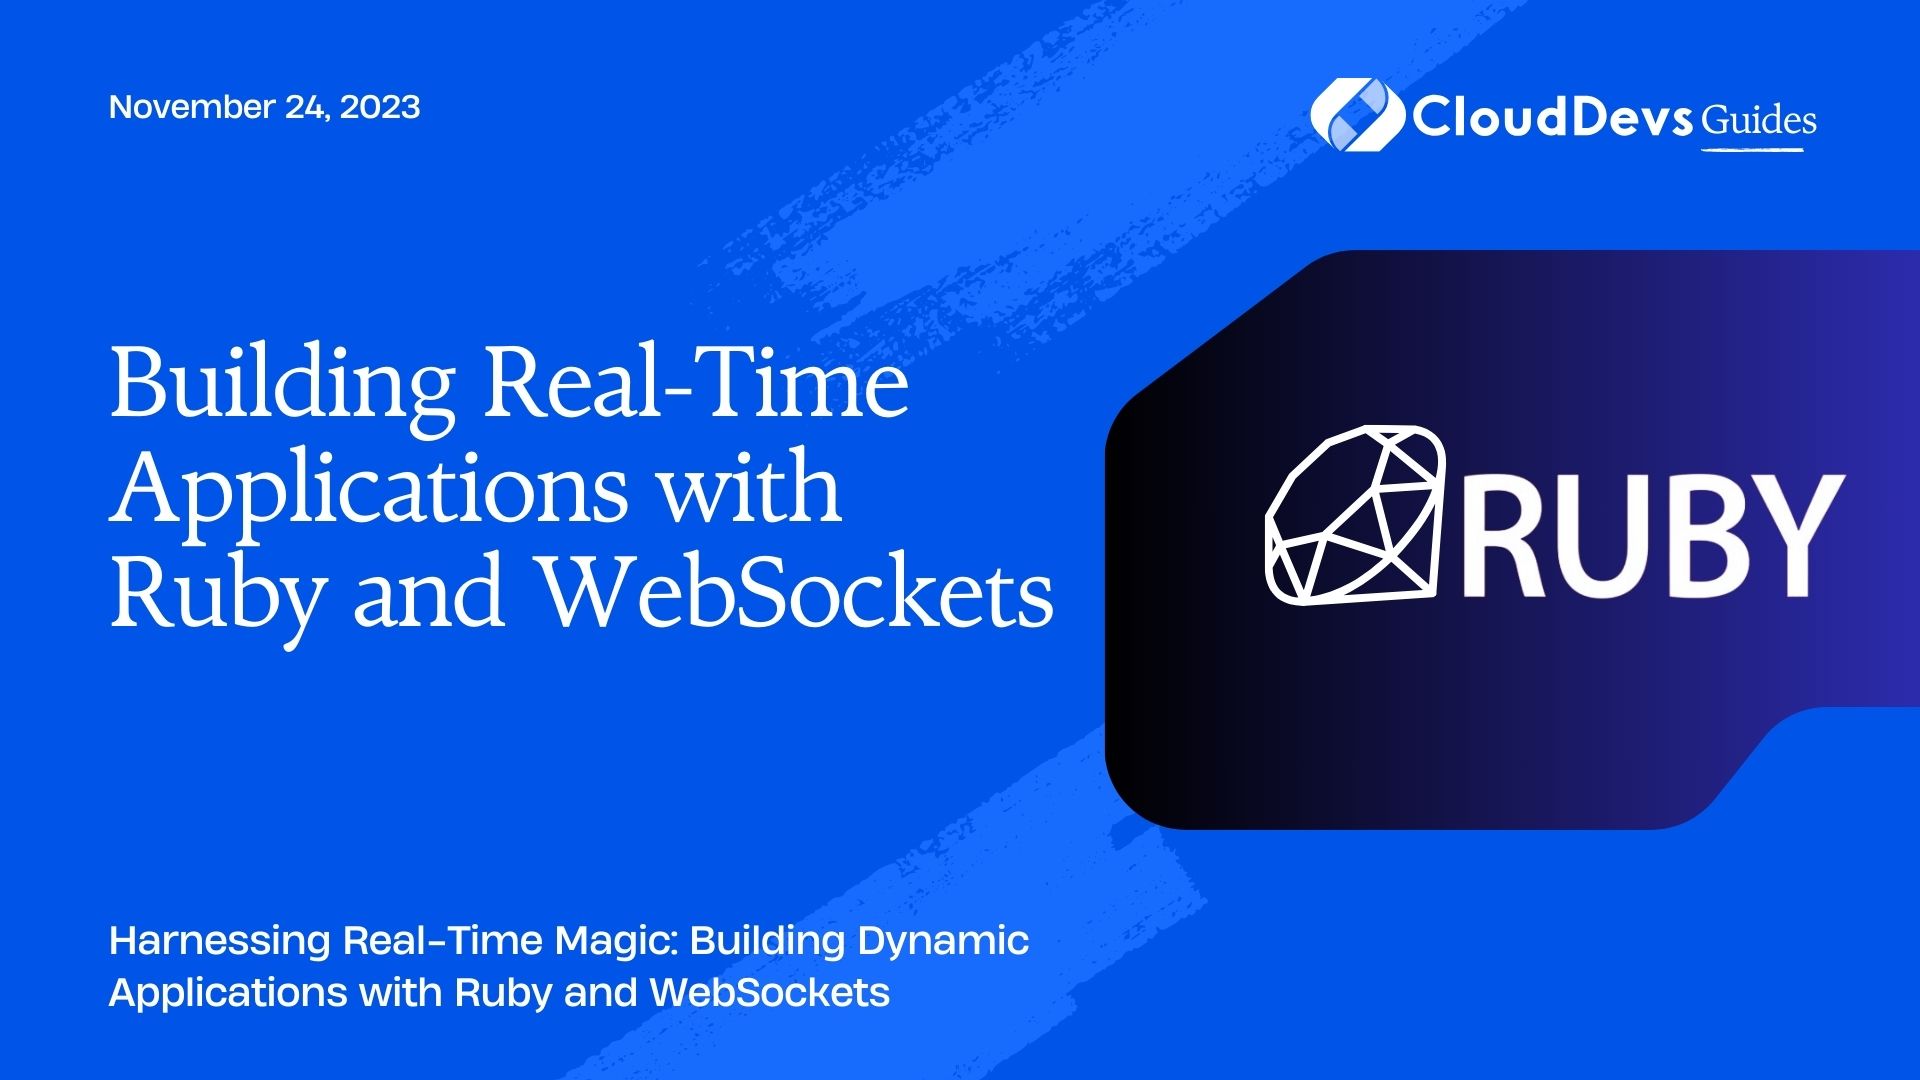 Building Real-Time Applications with Ruby and WebSockets